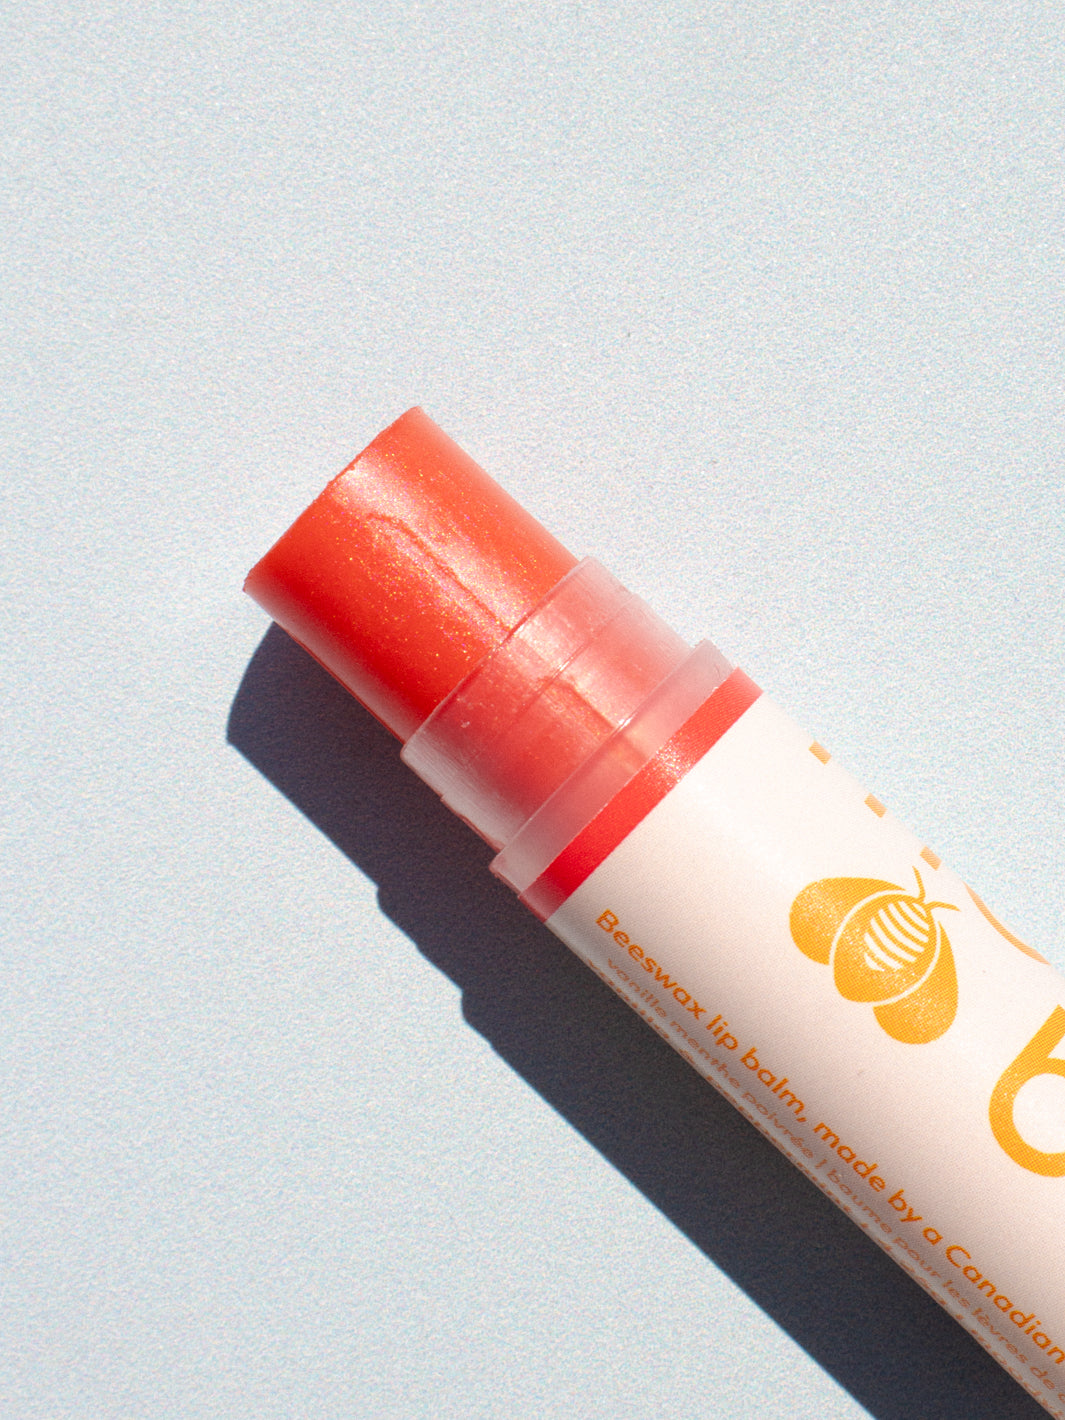 Beeswax Tinted Lip Balm - Now sold in cases of 24